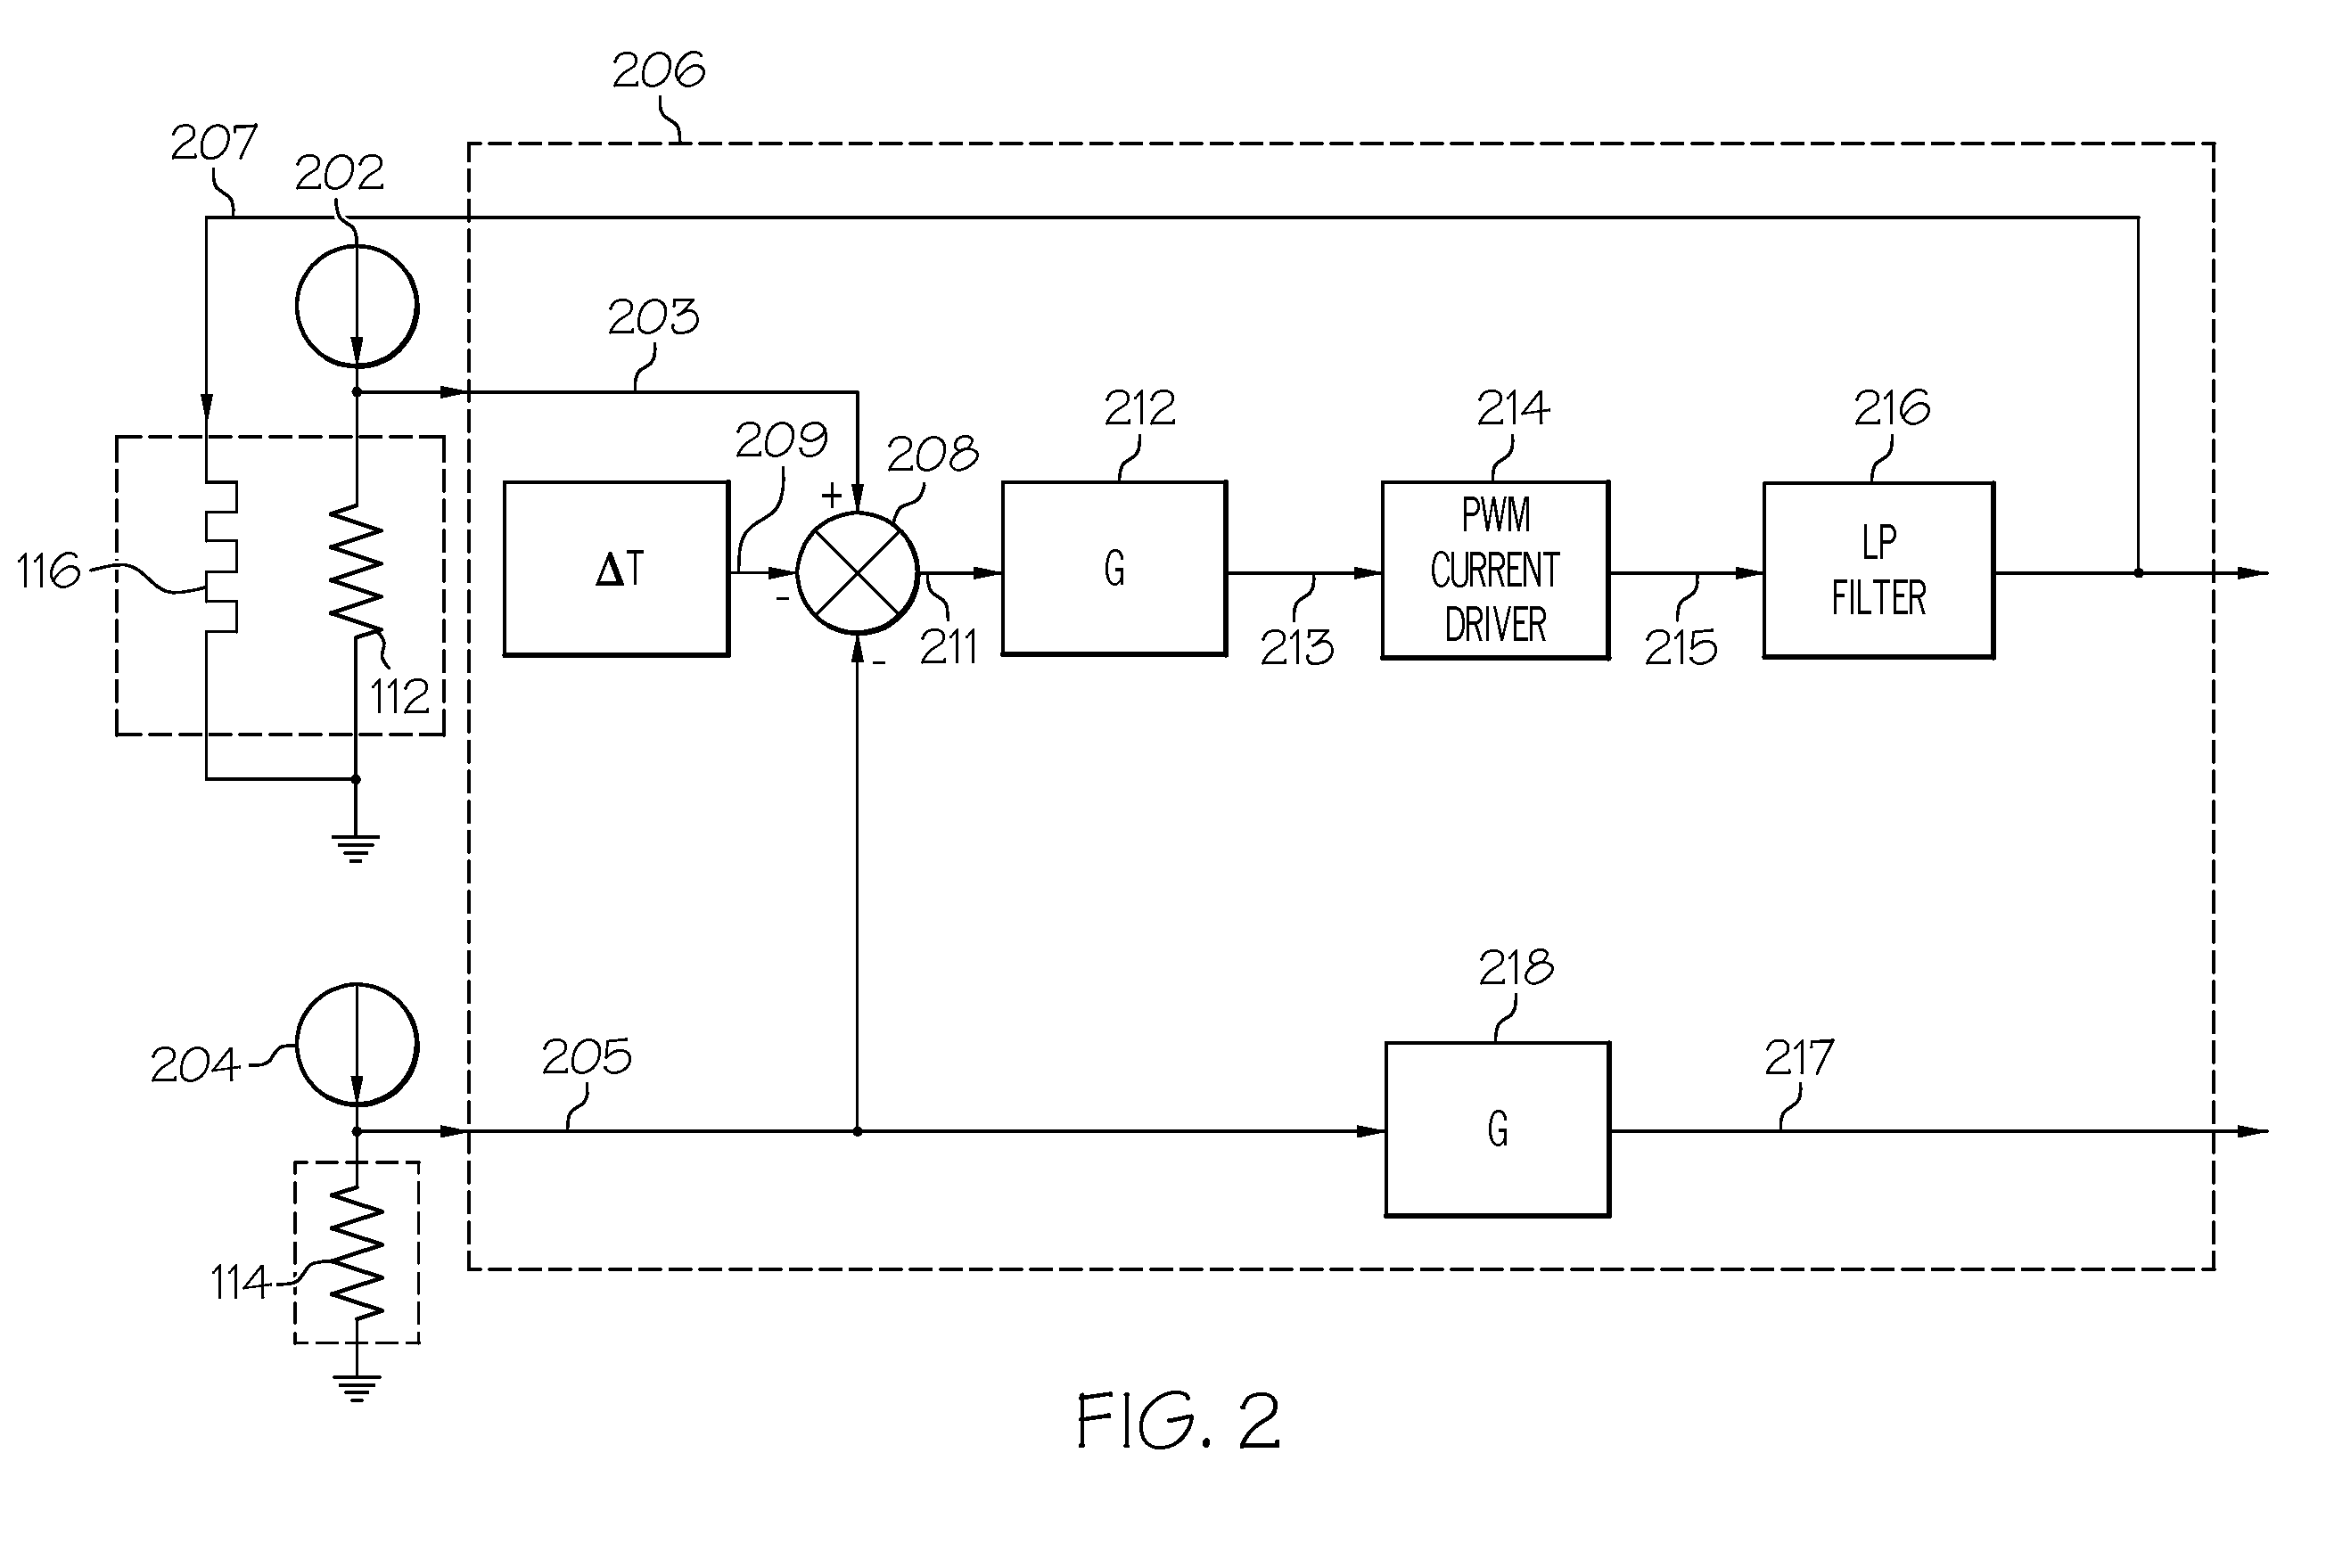 Thermal mass flow transducer including PWM-type heater current driver